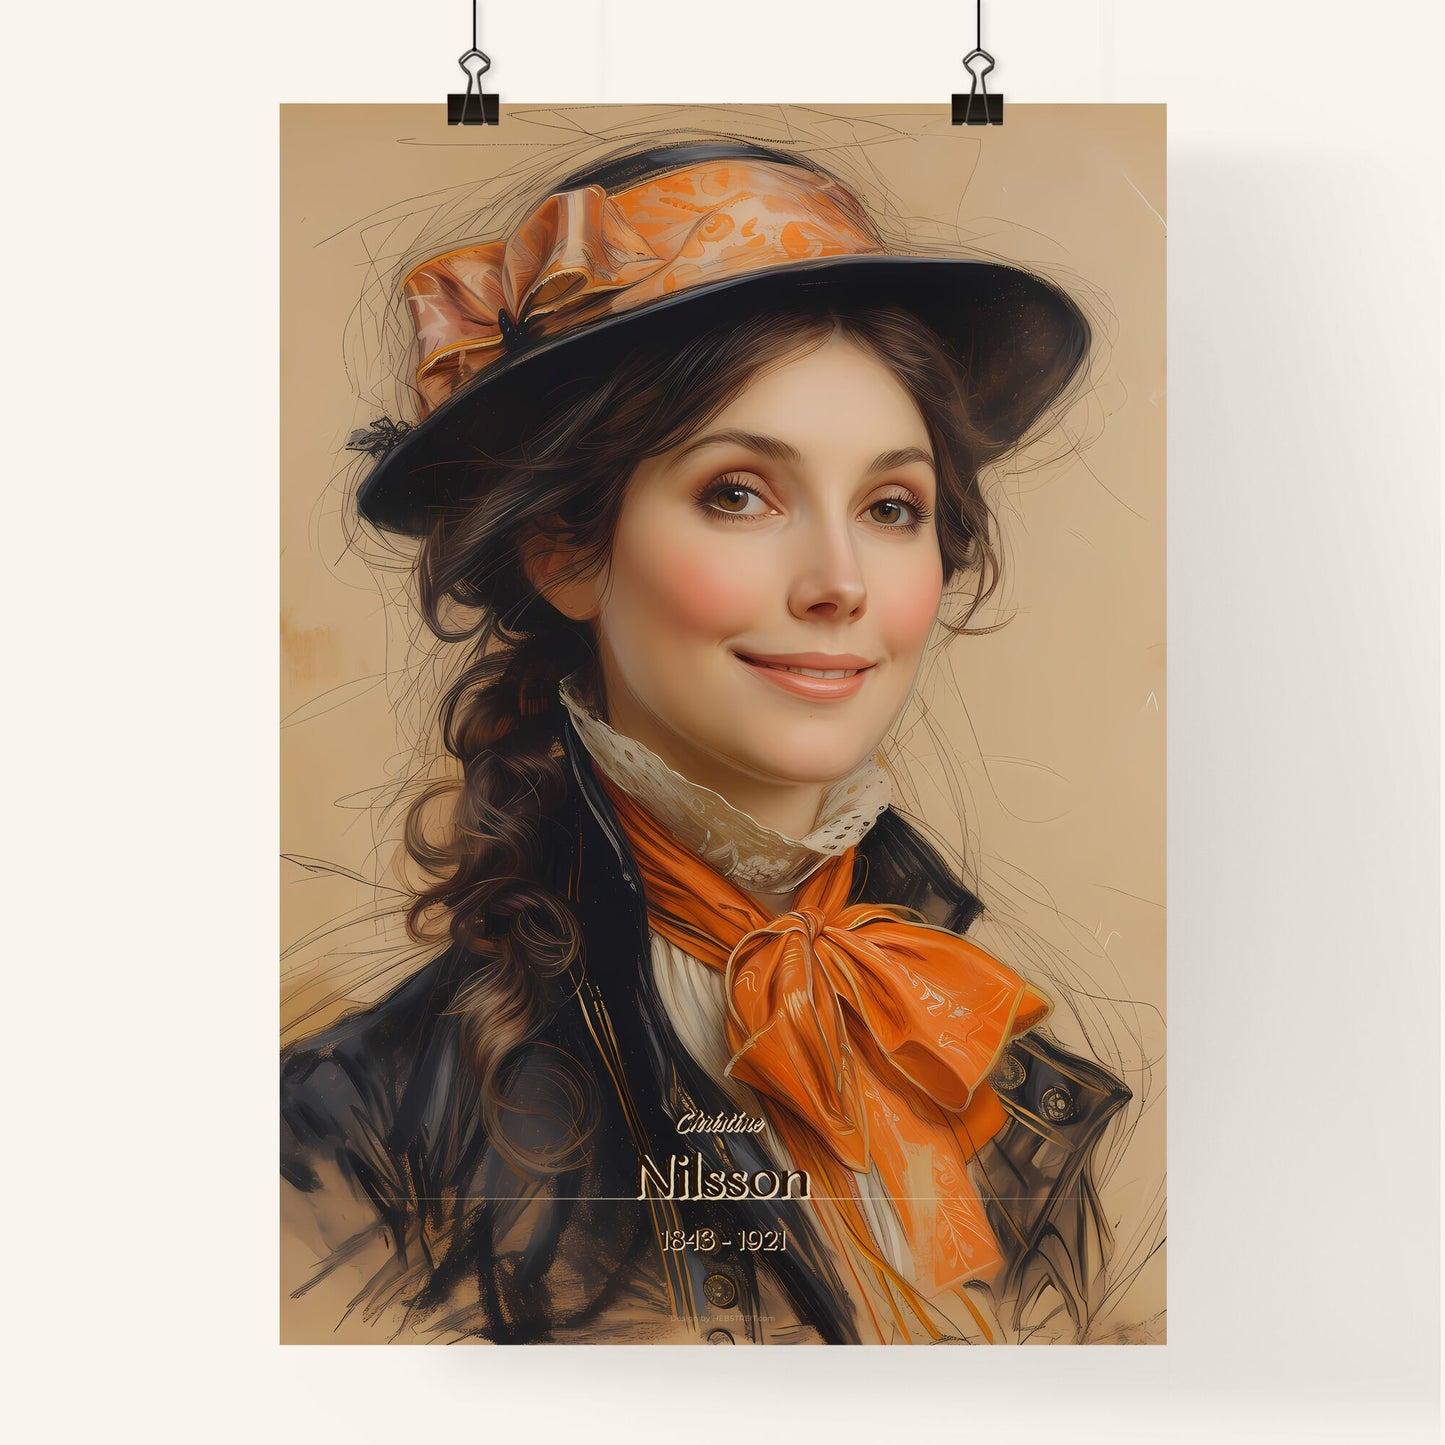 Christine, Nilsson, 1843 - 1921, A Poster of a woman wearing a hat and a scarf Default Title